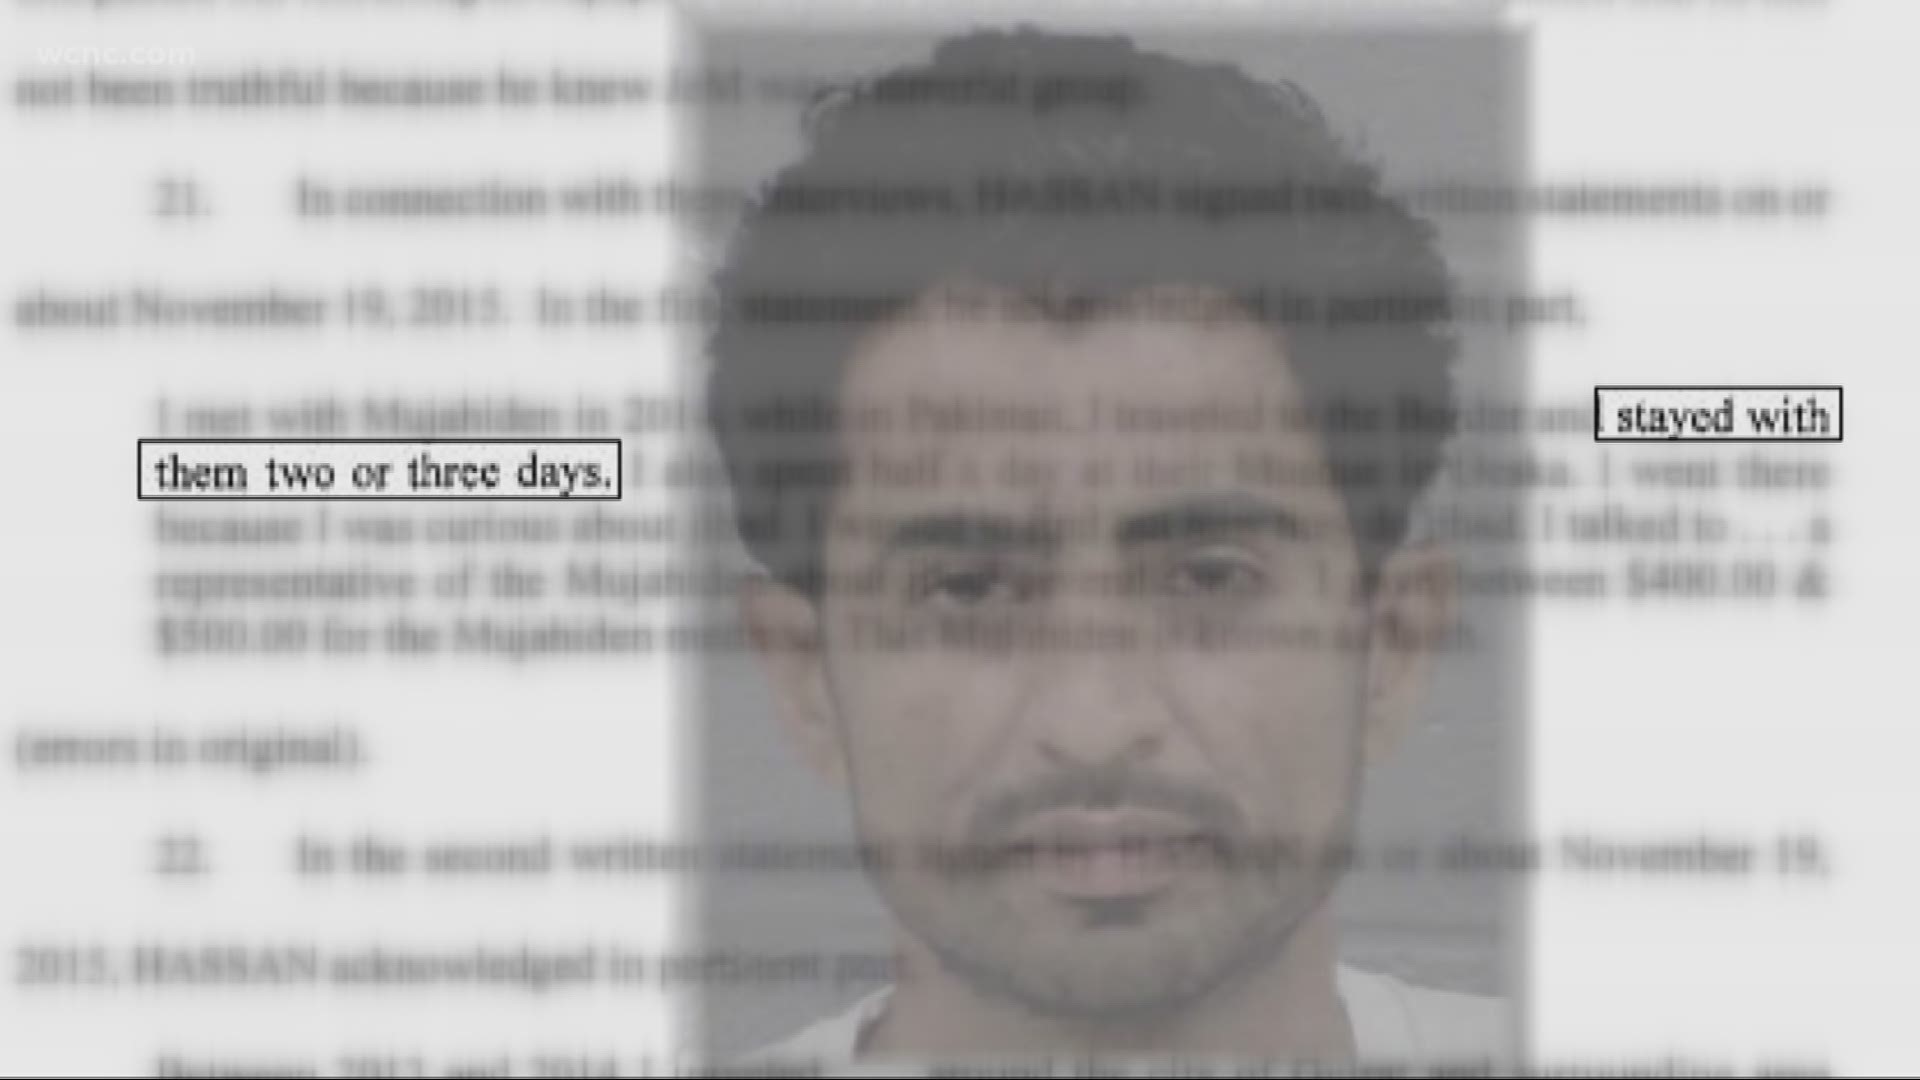 He was en route to the United States from Pakistan, according to the Mecklenburg County Sheriff's Office.